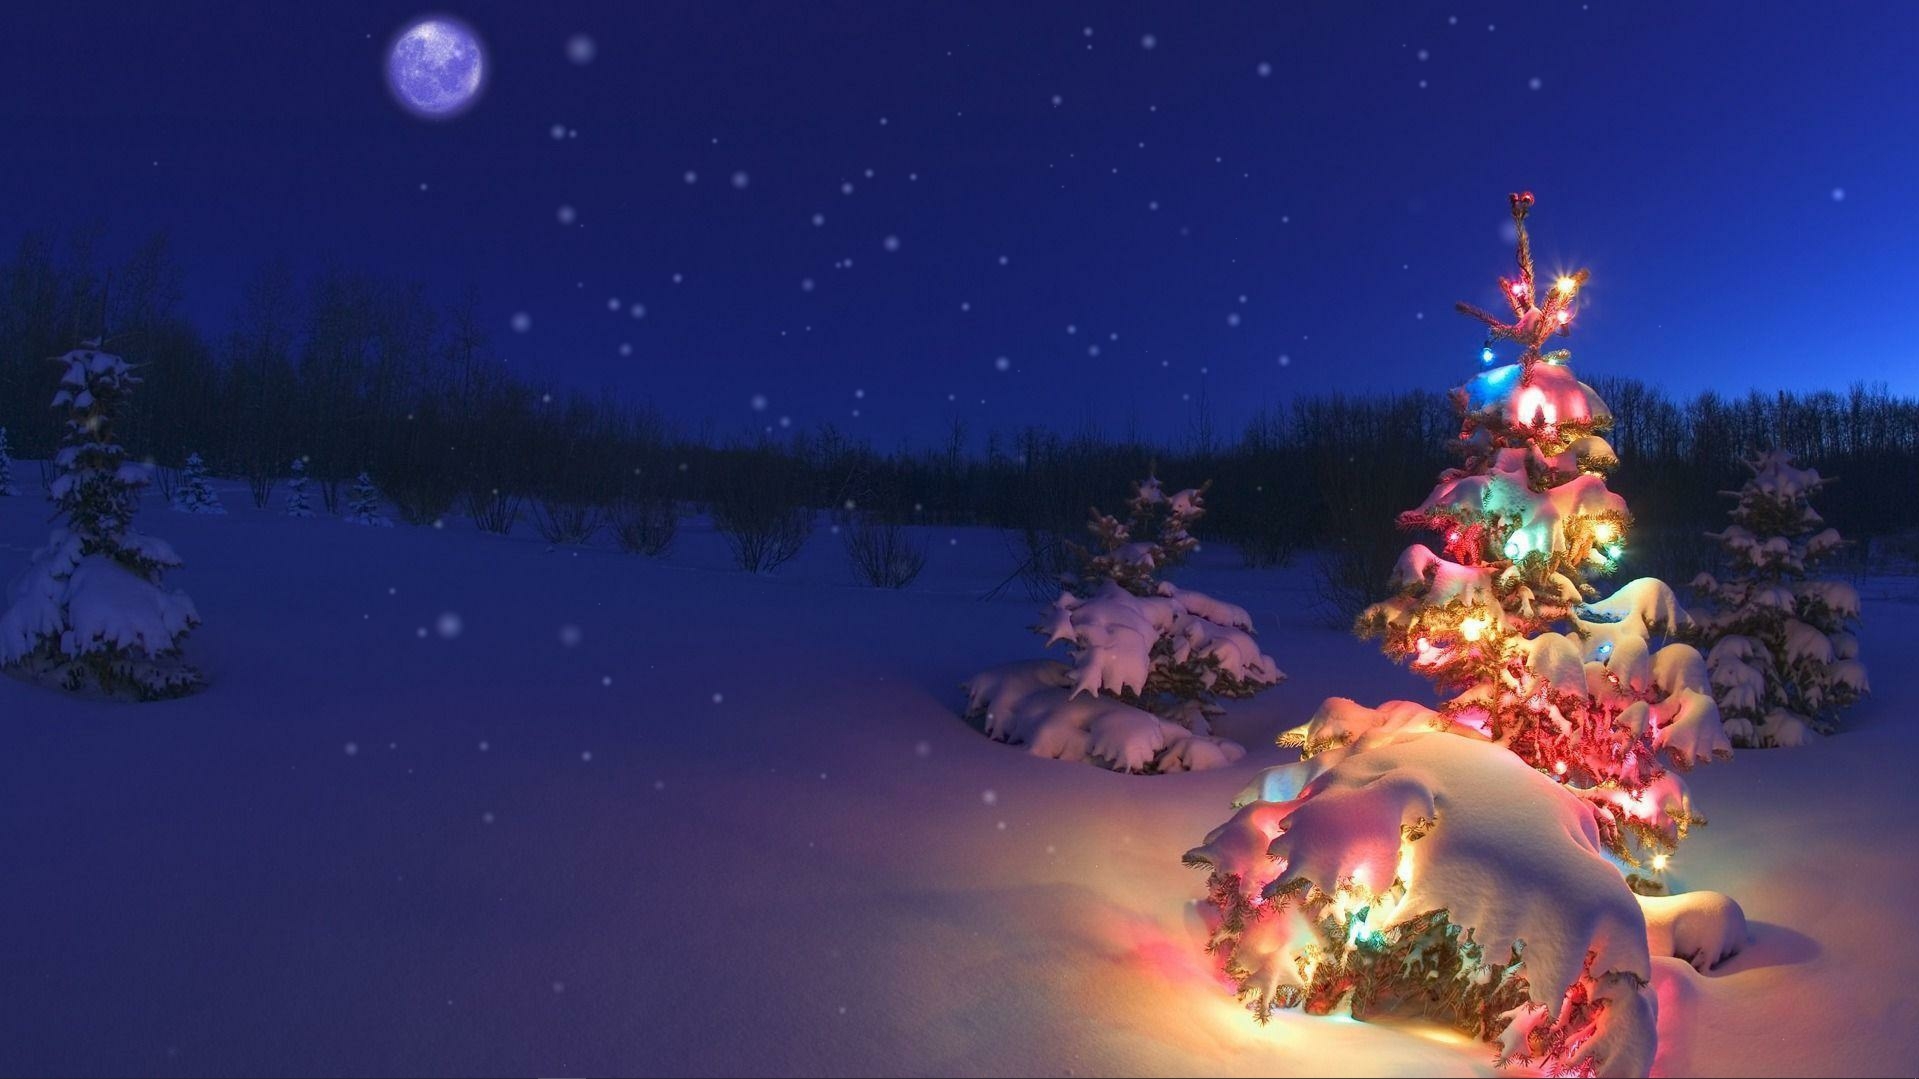 Christmas tree in the winter forest live wallpaper [DOWNLOAD FREE]